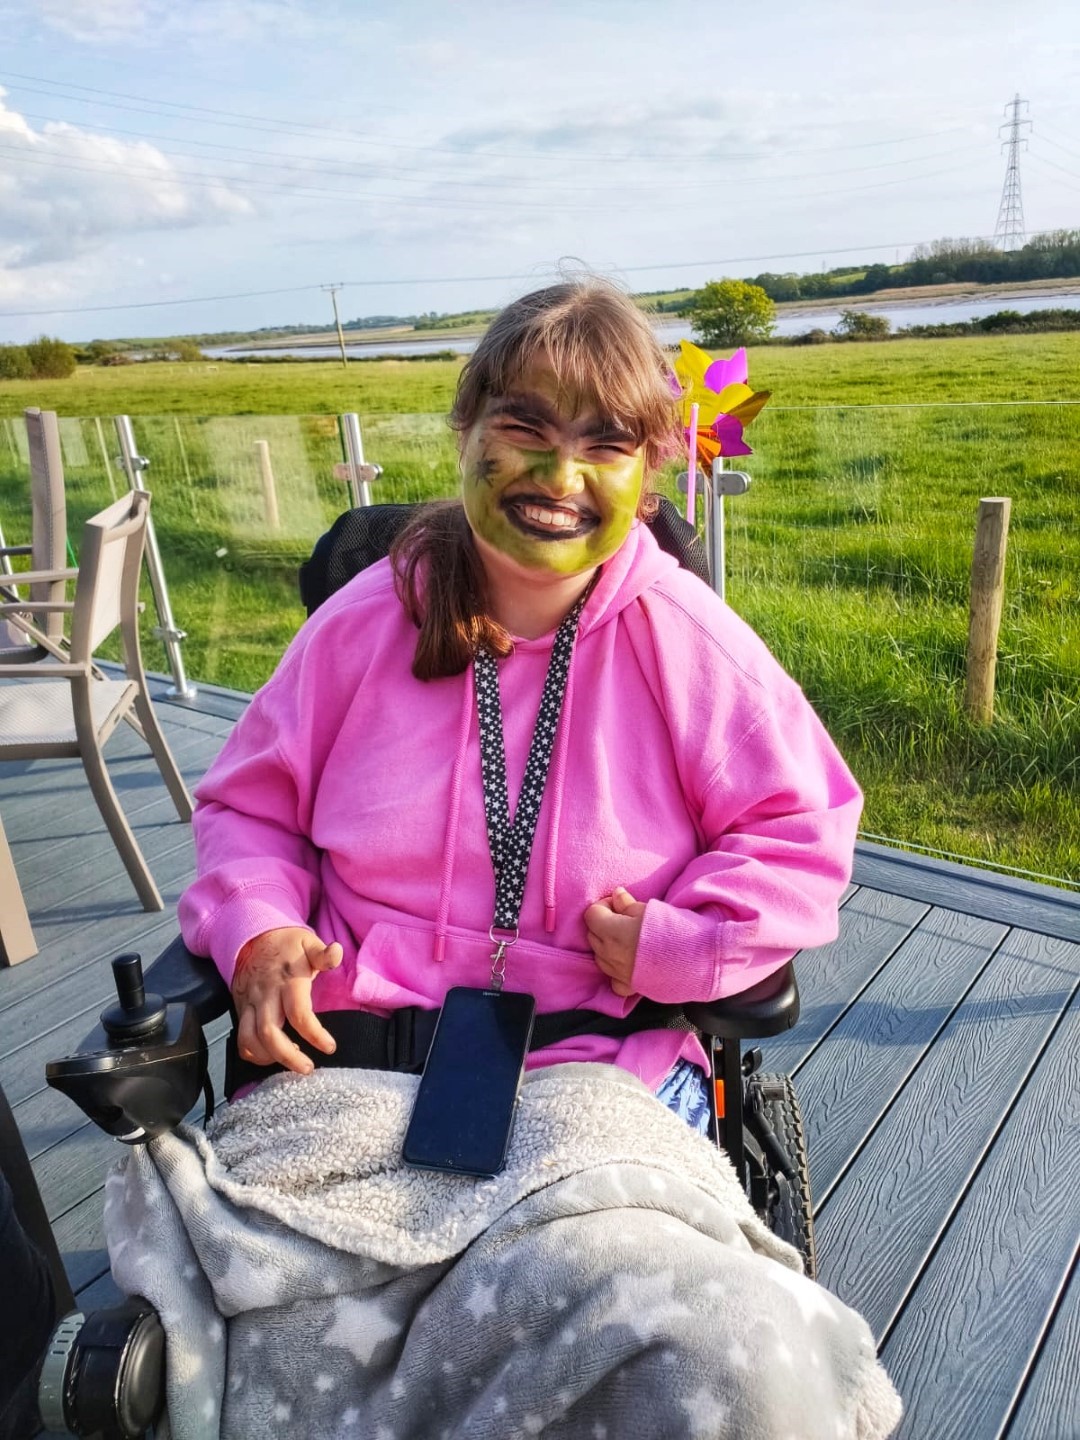 A beautiful girl in a wheelchair with green face paint and a smile that says it all. Mobile phone hanging from neck. Fields in the background and river.